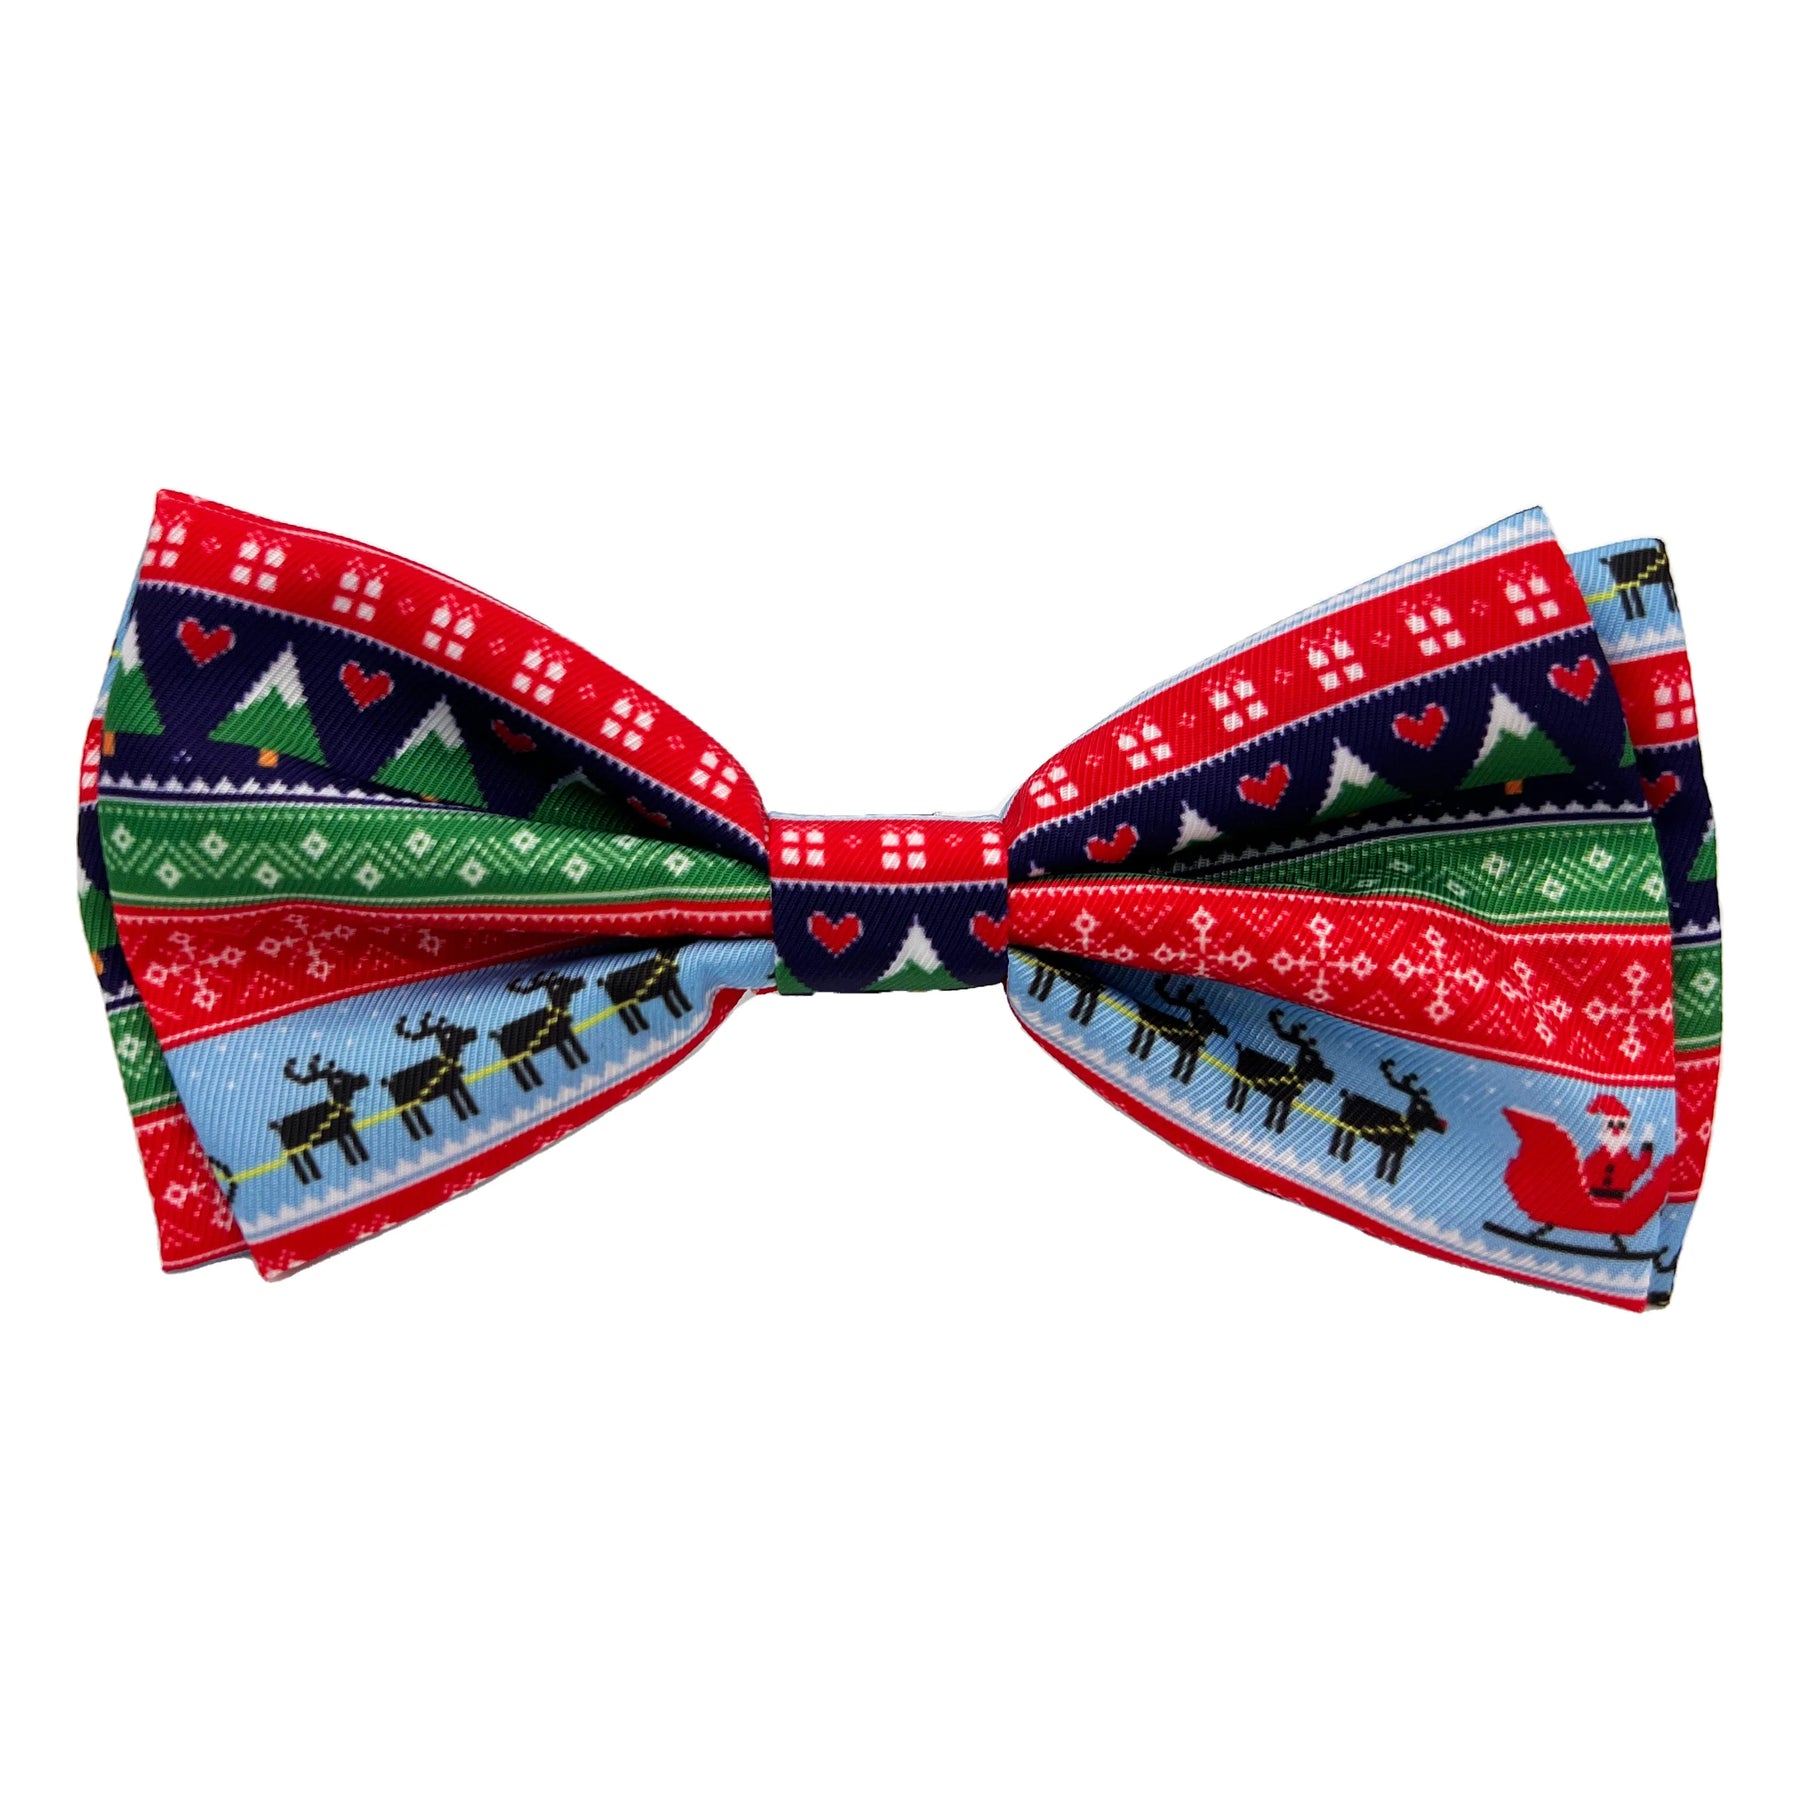 Huxley & Kent - Bow Tie Ugly Sweater